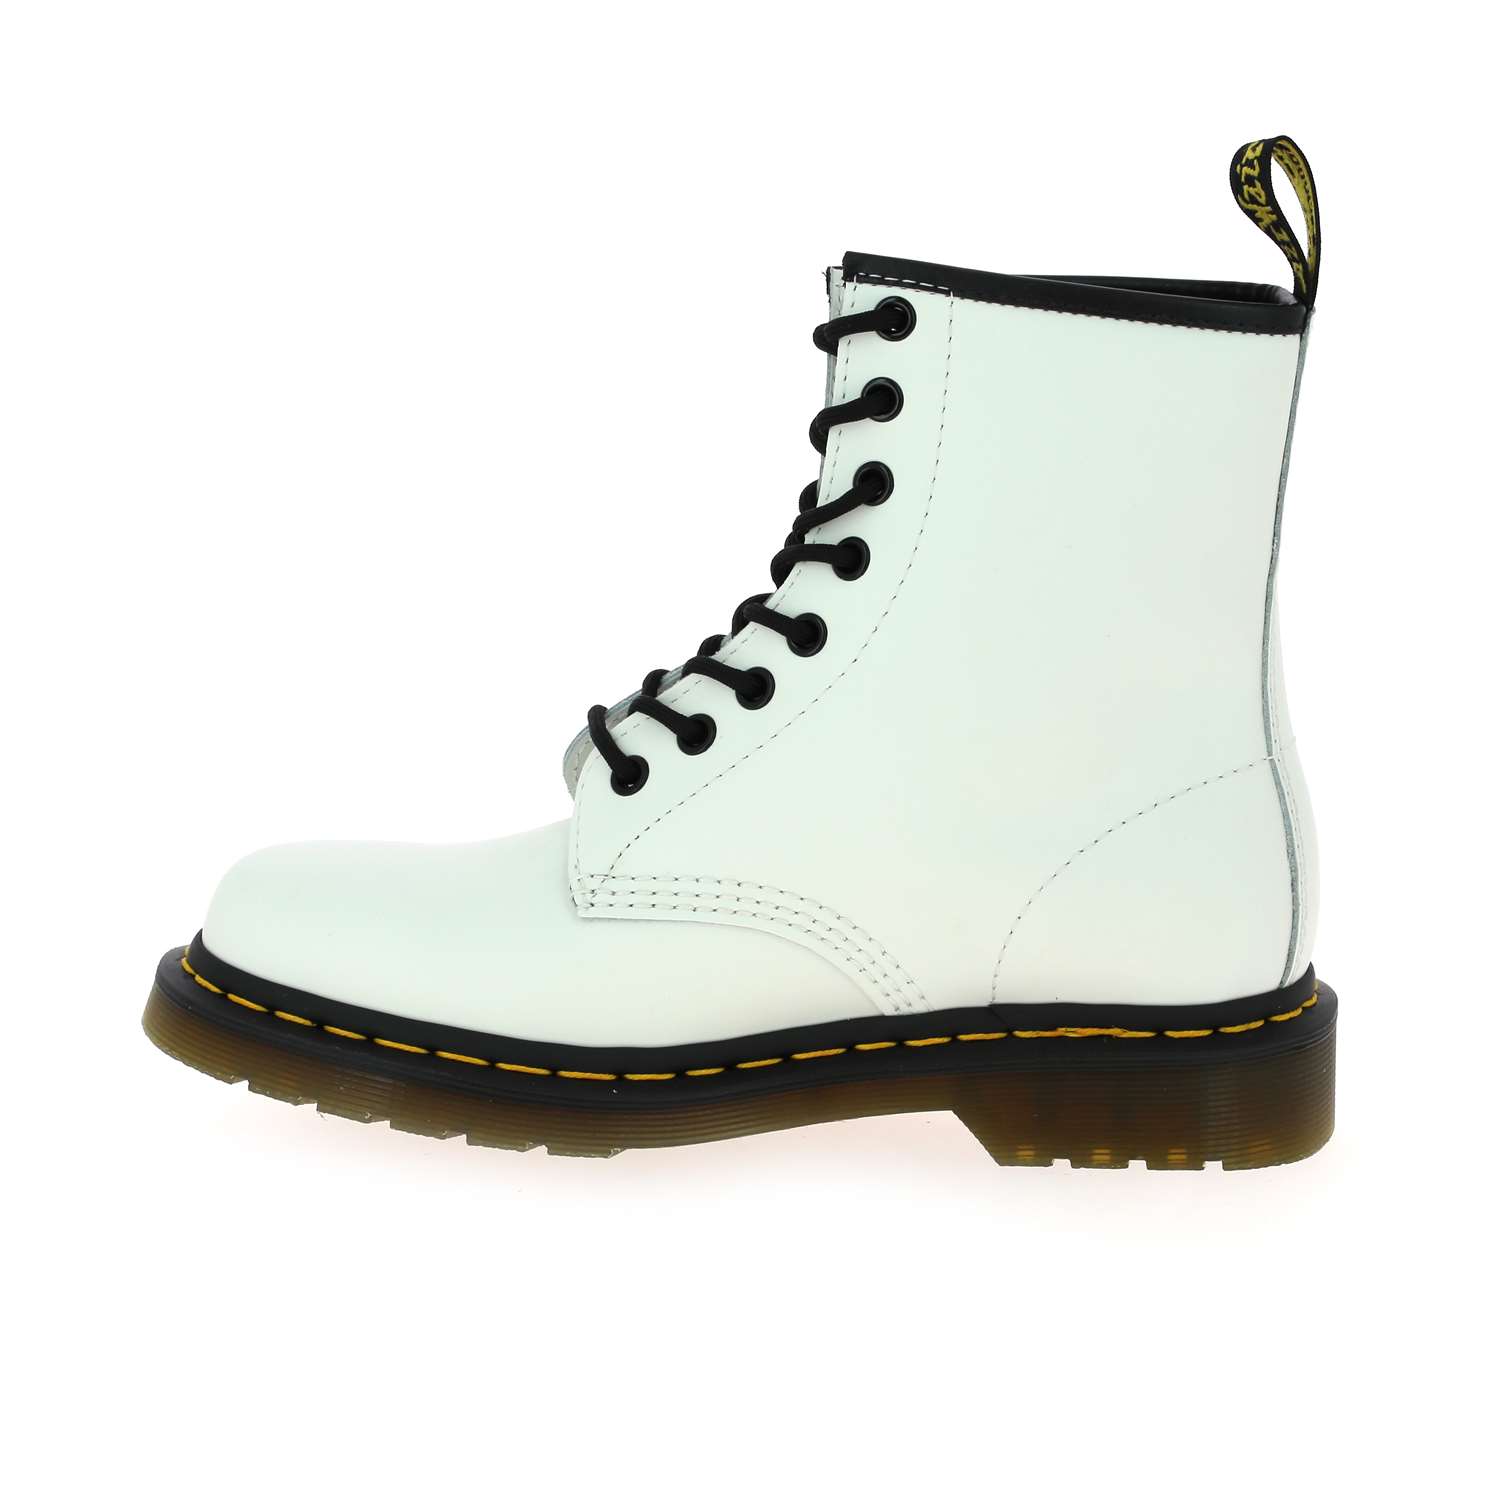 5 - 1460 SMOOTH - DOC MARTENS - Boots et bottines - Cuir